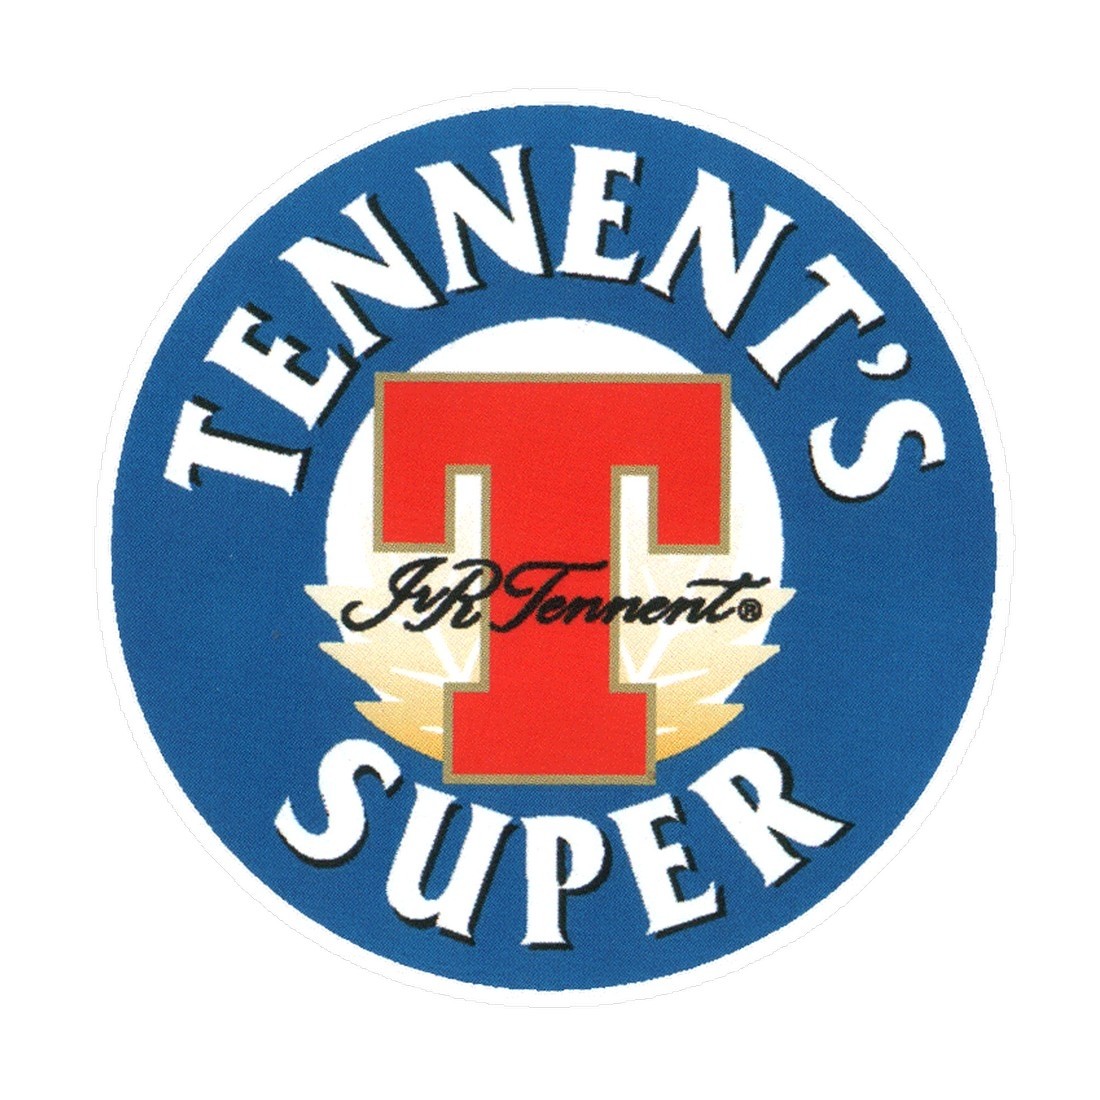 TENNENT'S